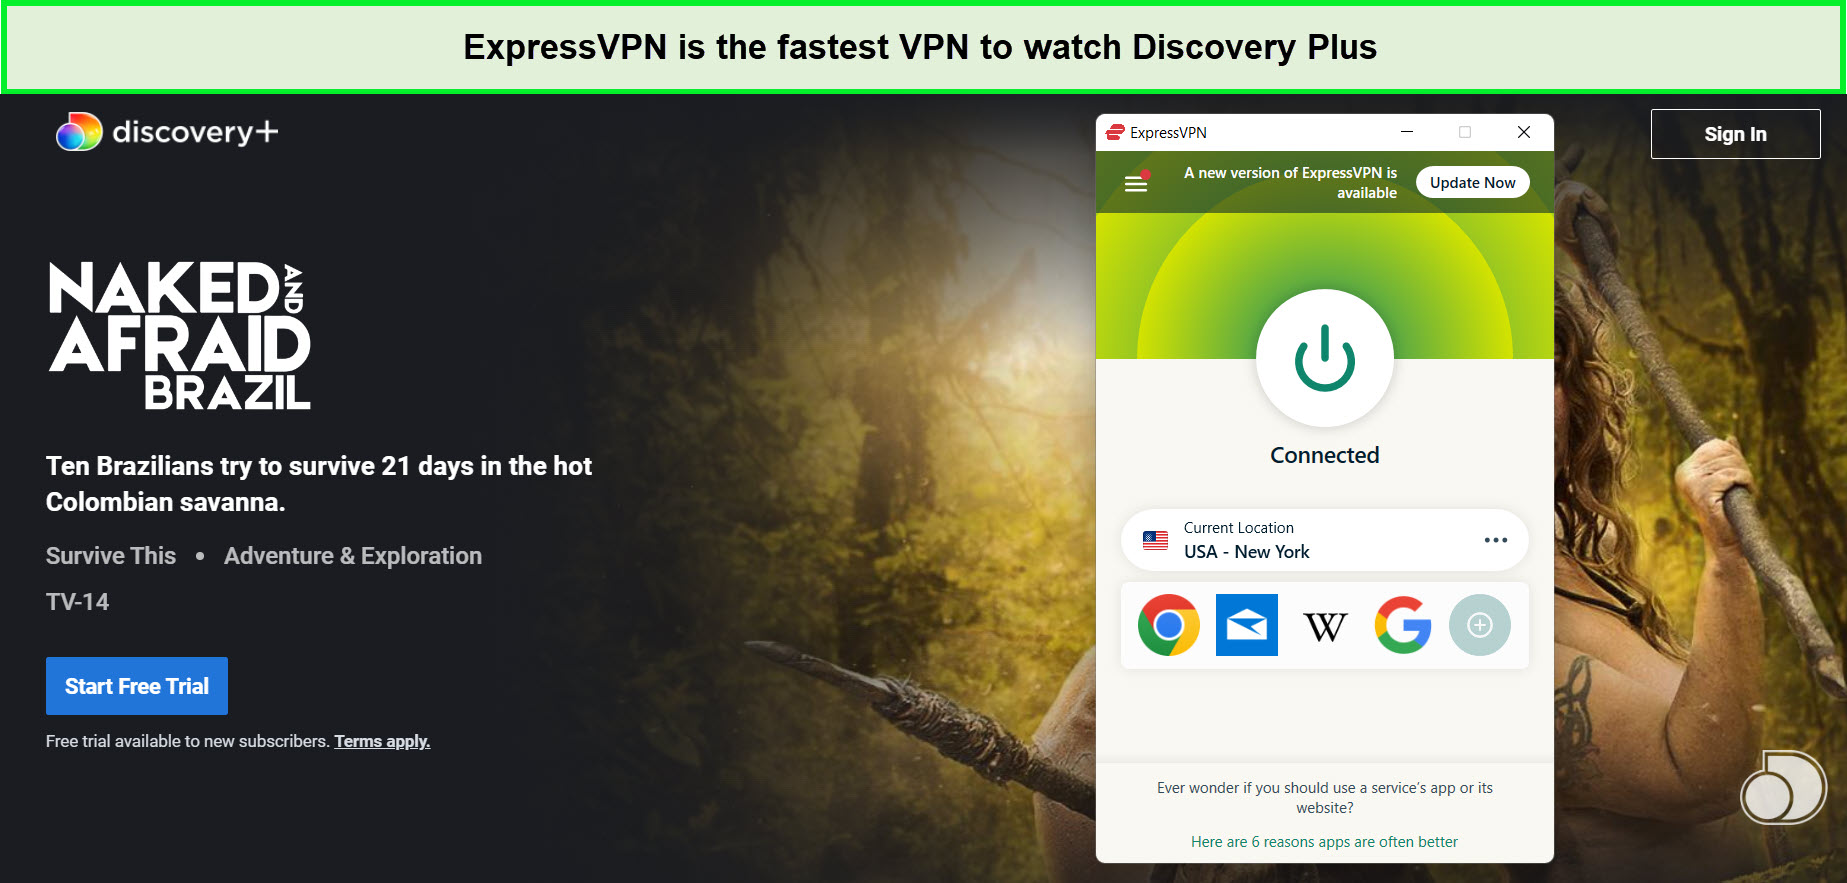 expressvpn-is-the-best-vpn-to-watch-naked-and-afraid-brazil-season-16-on-discovery-plus-in-uk